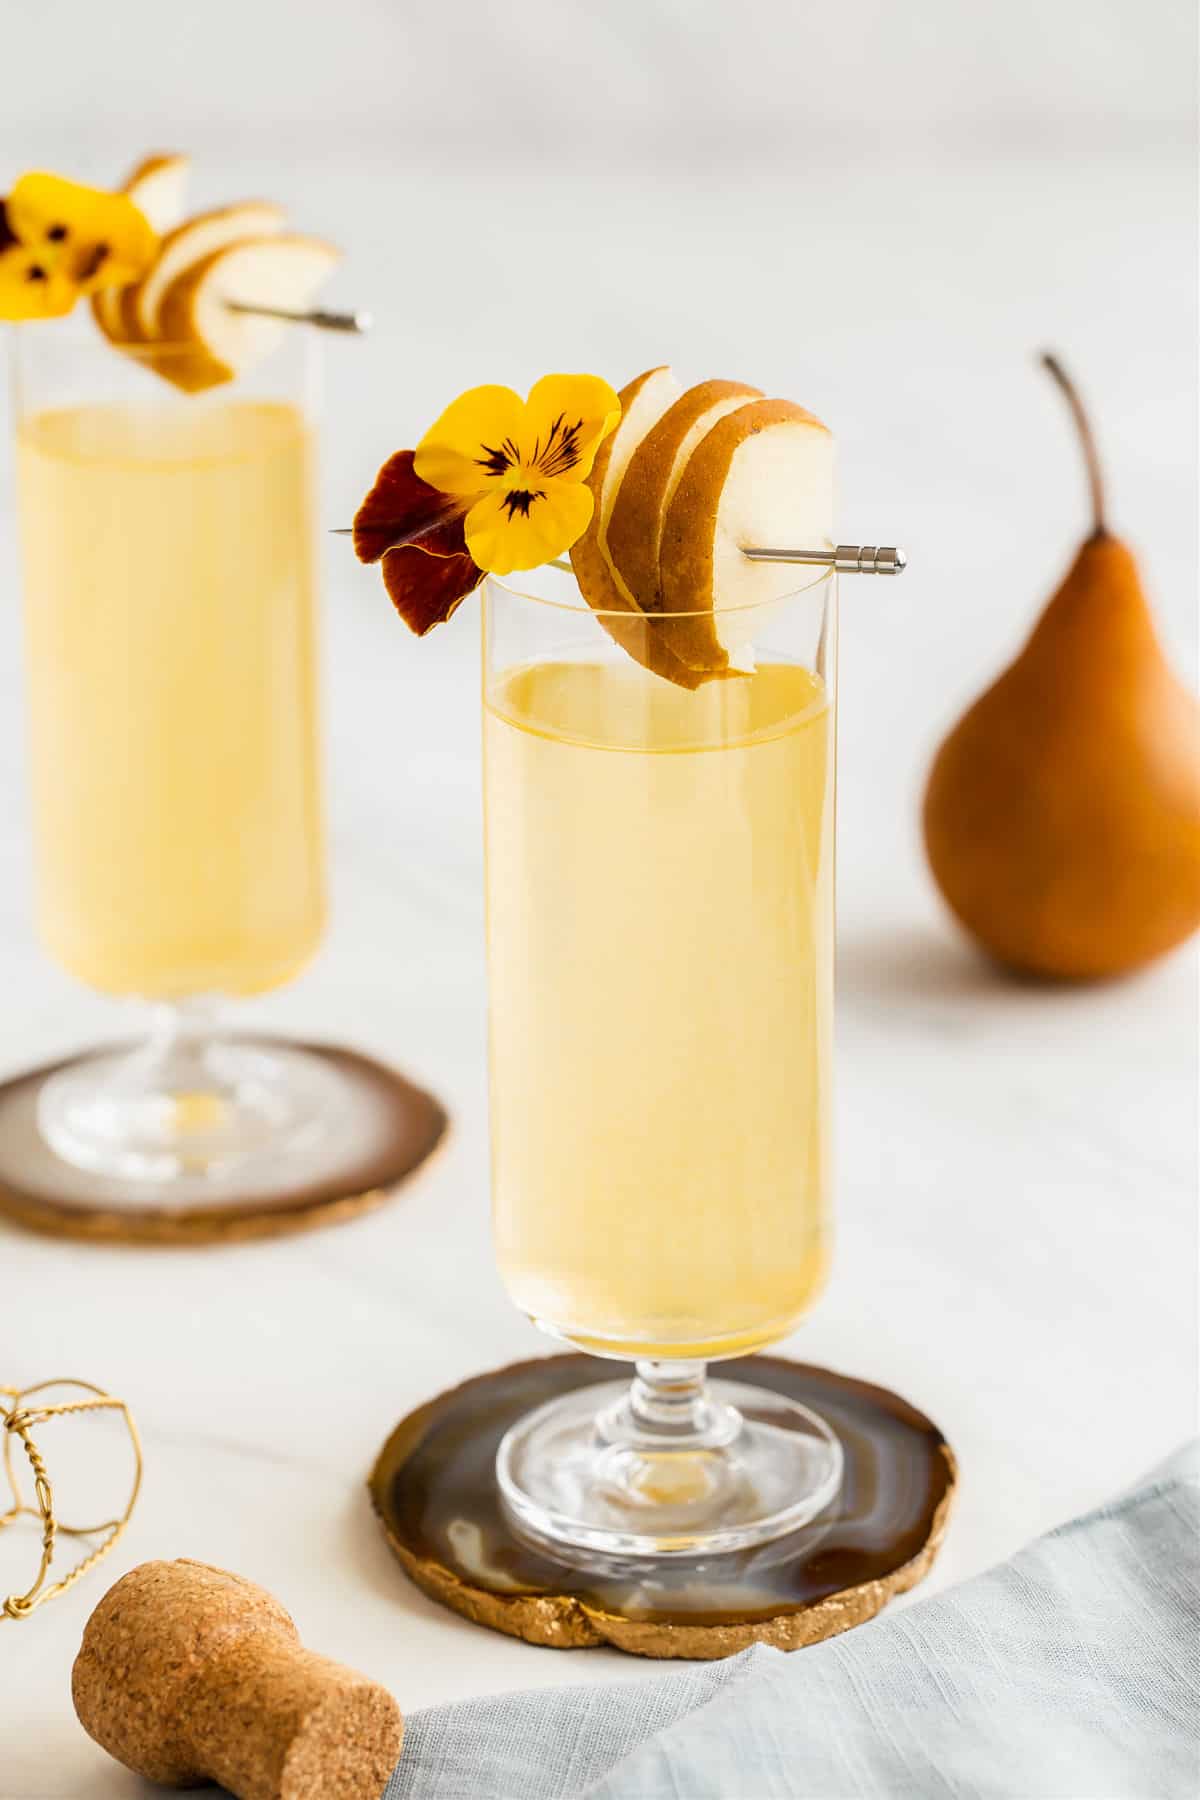 two glasses with yellow drink and sliced pear garnish